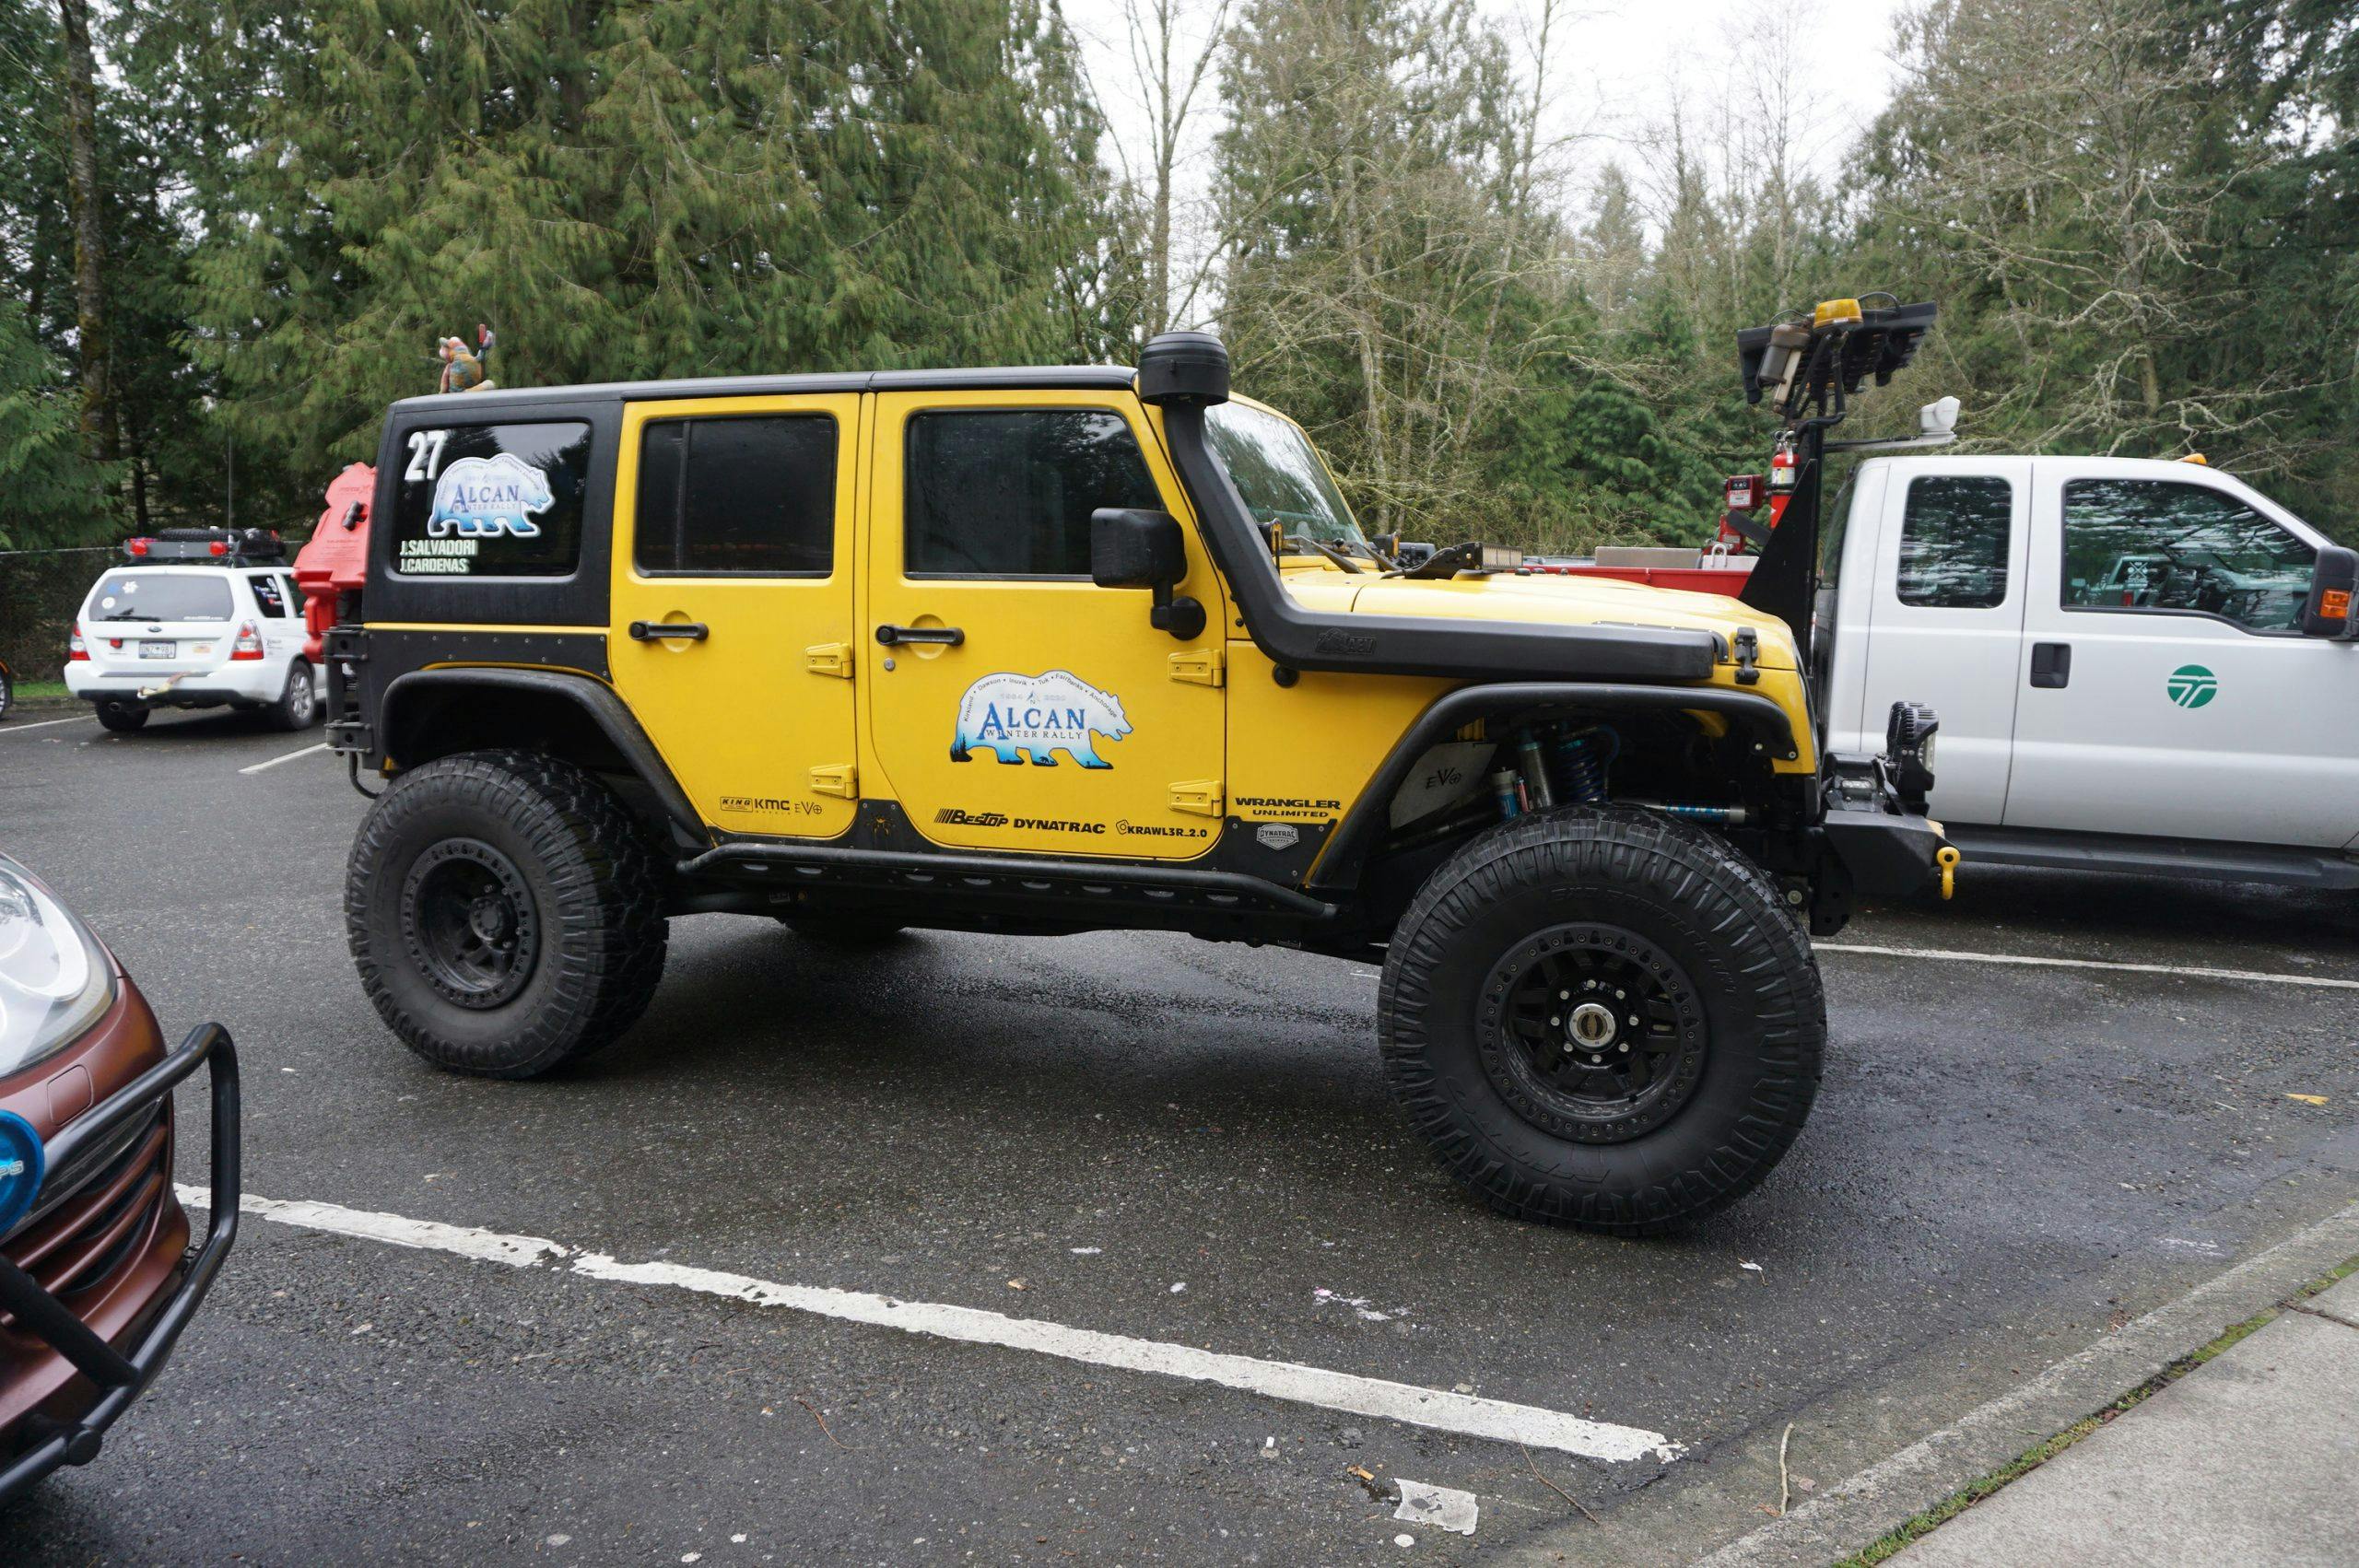 jeep in parking lot for alcan 5000 rally